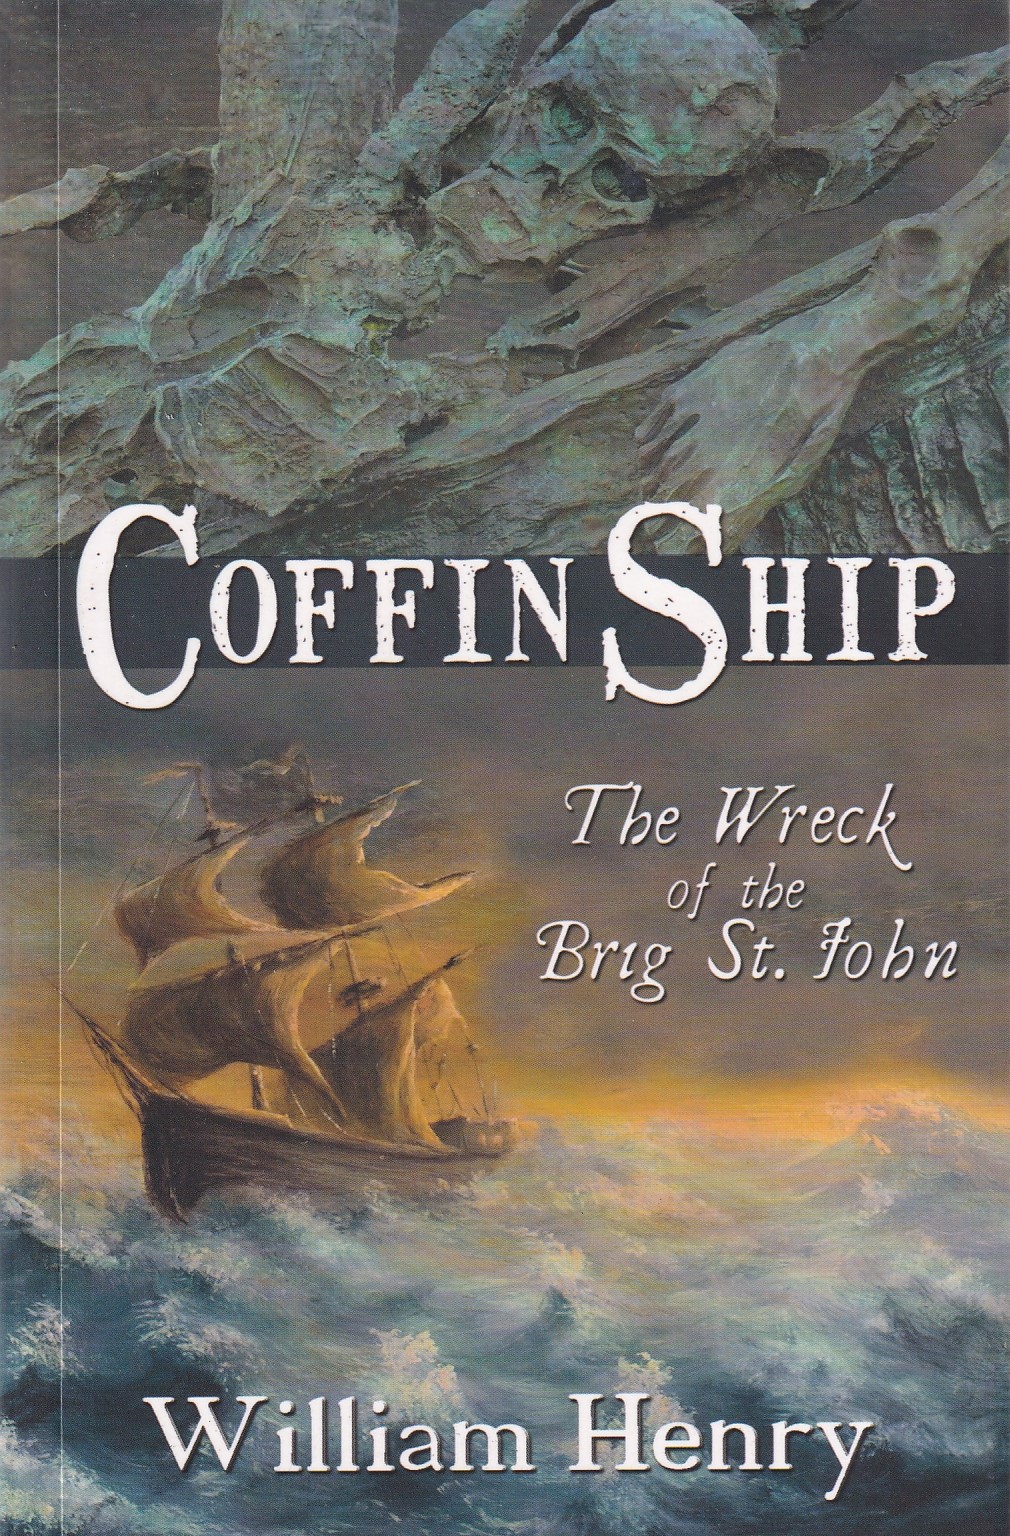 Coffin Ship: The Wreck of the Brig St. John [SIGNED] | William Henry | Charlie Byrne's